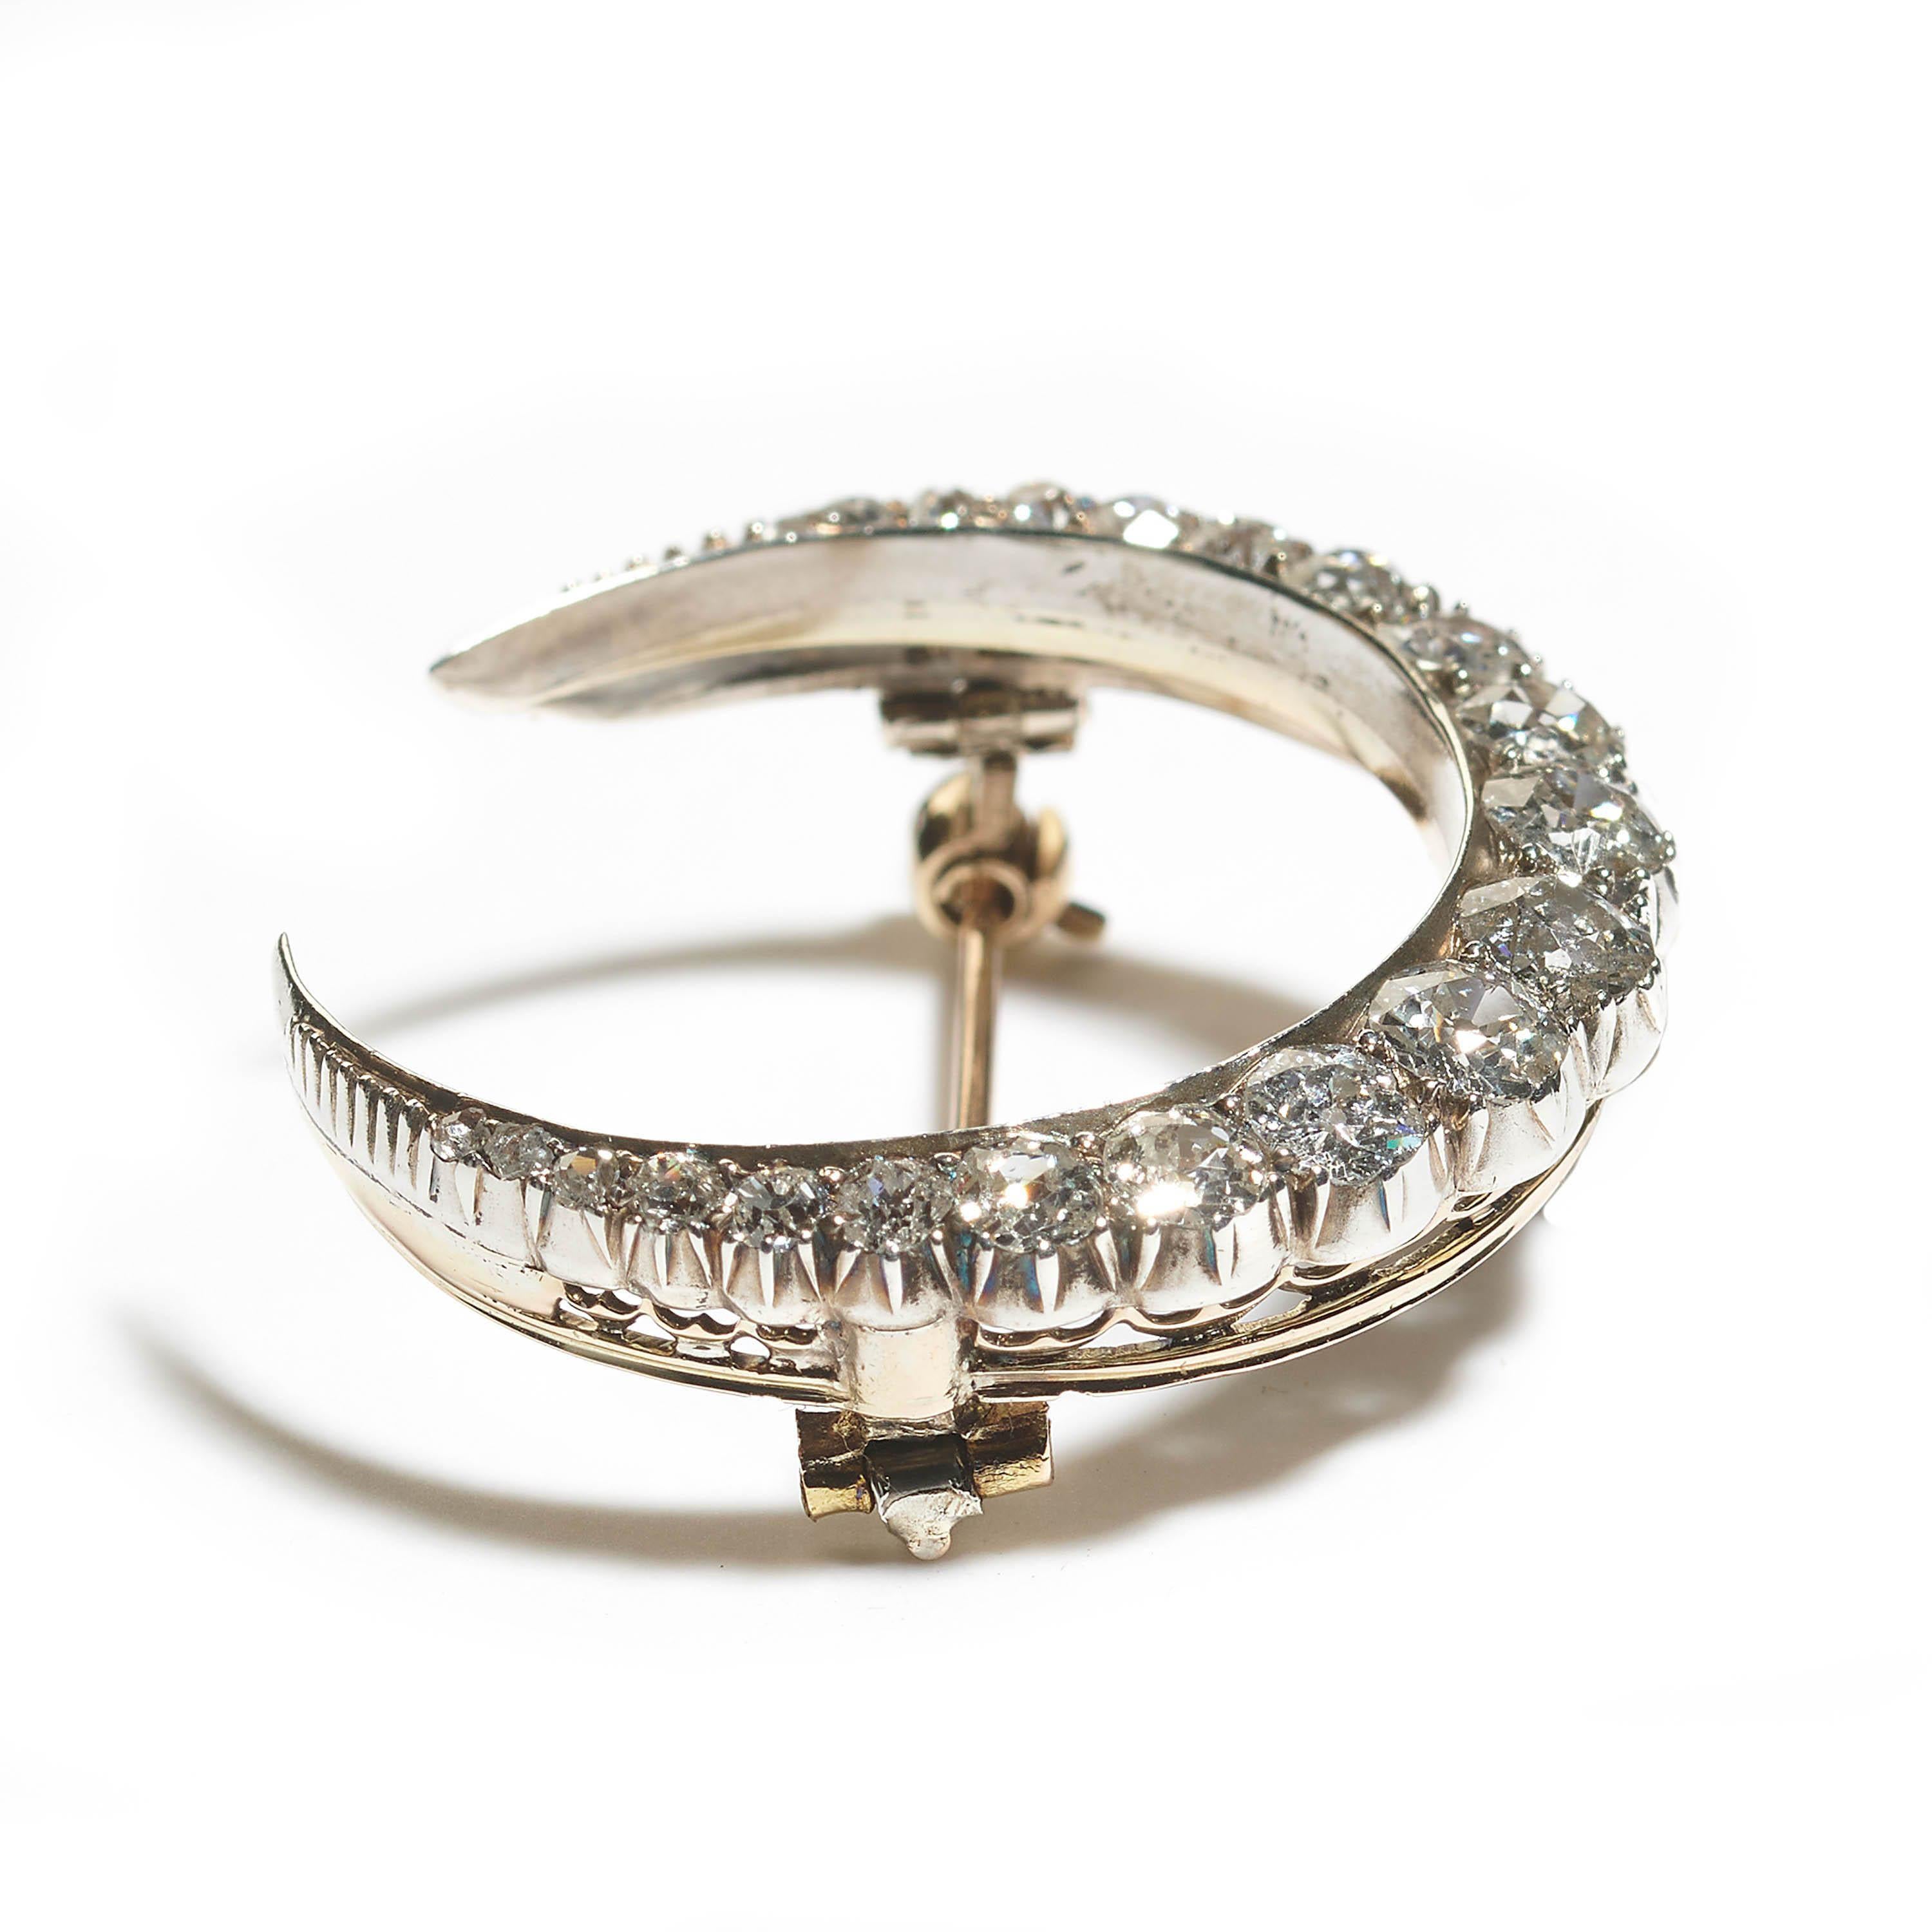 An antique crescent moon brooch, the body is set with a row of old-cut diamonds, graduating in size, tapering to rose-cuts, weighing an estimated total of 3.50 carats, claw set in silver-upon-gold, with a plain inner curve and cut down set outer